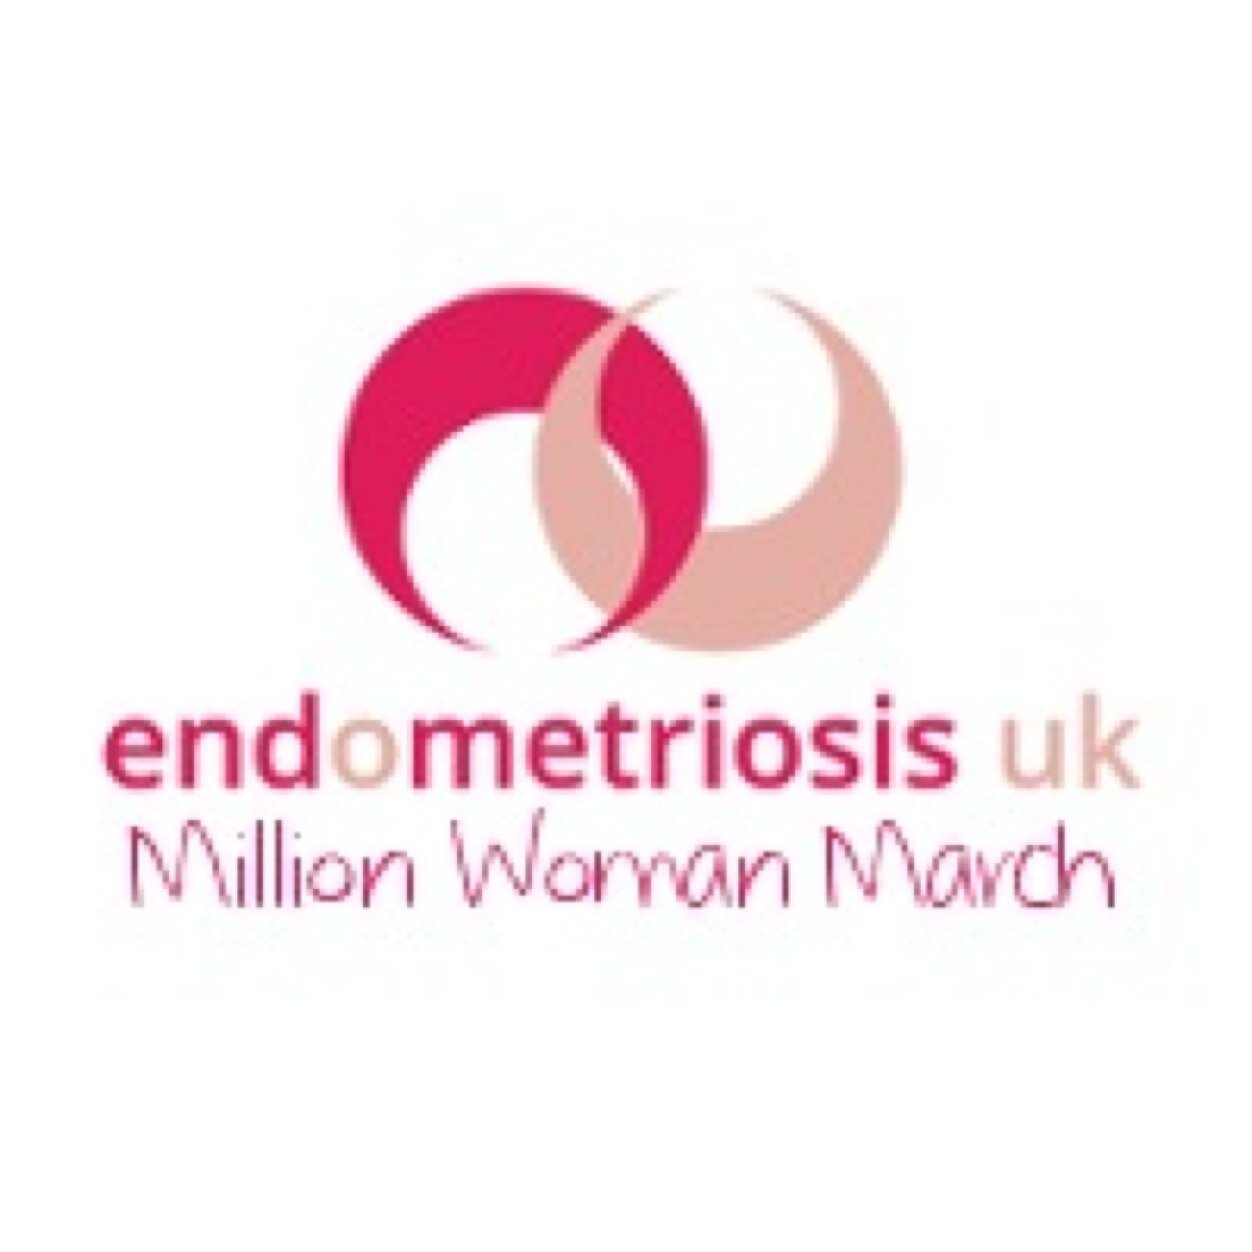 Please follow our new account @WWEndoMarchUK for updates on this years Worldwide EndoMarch